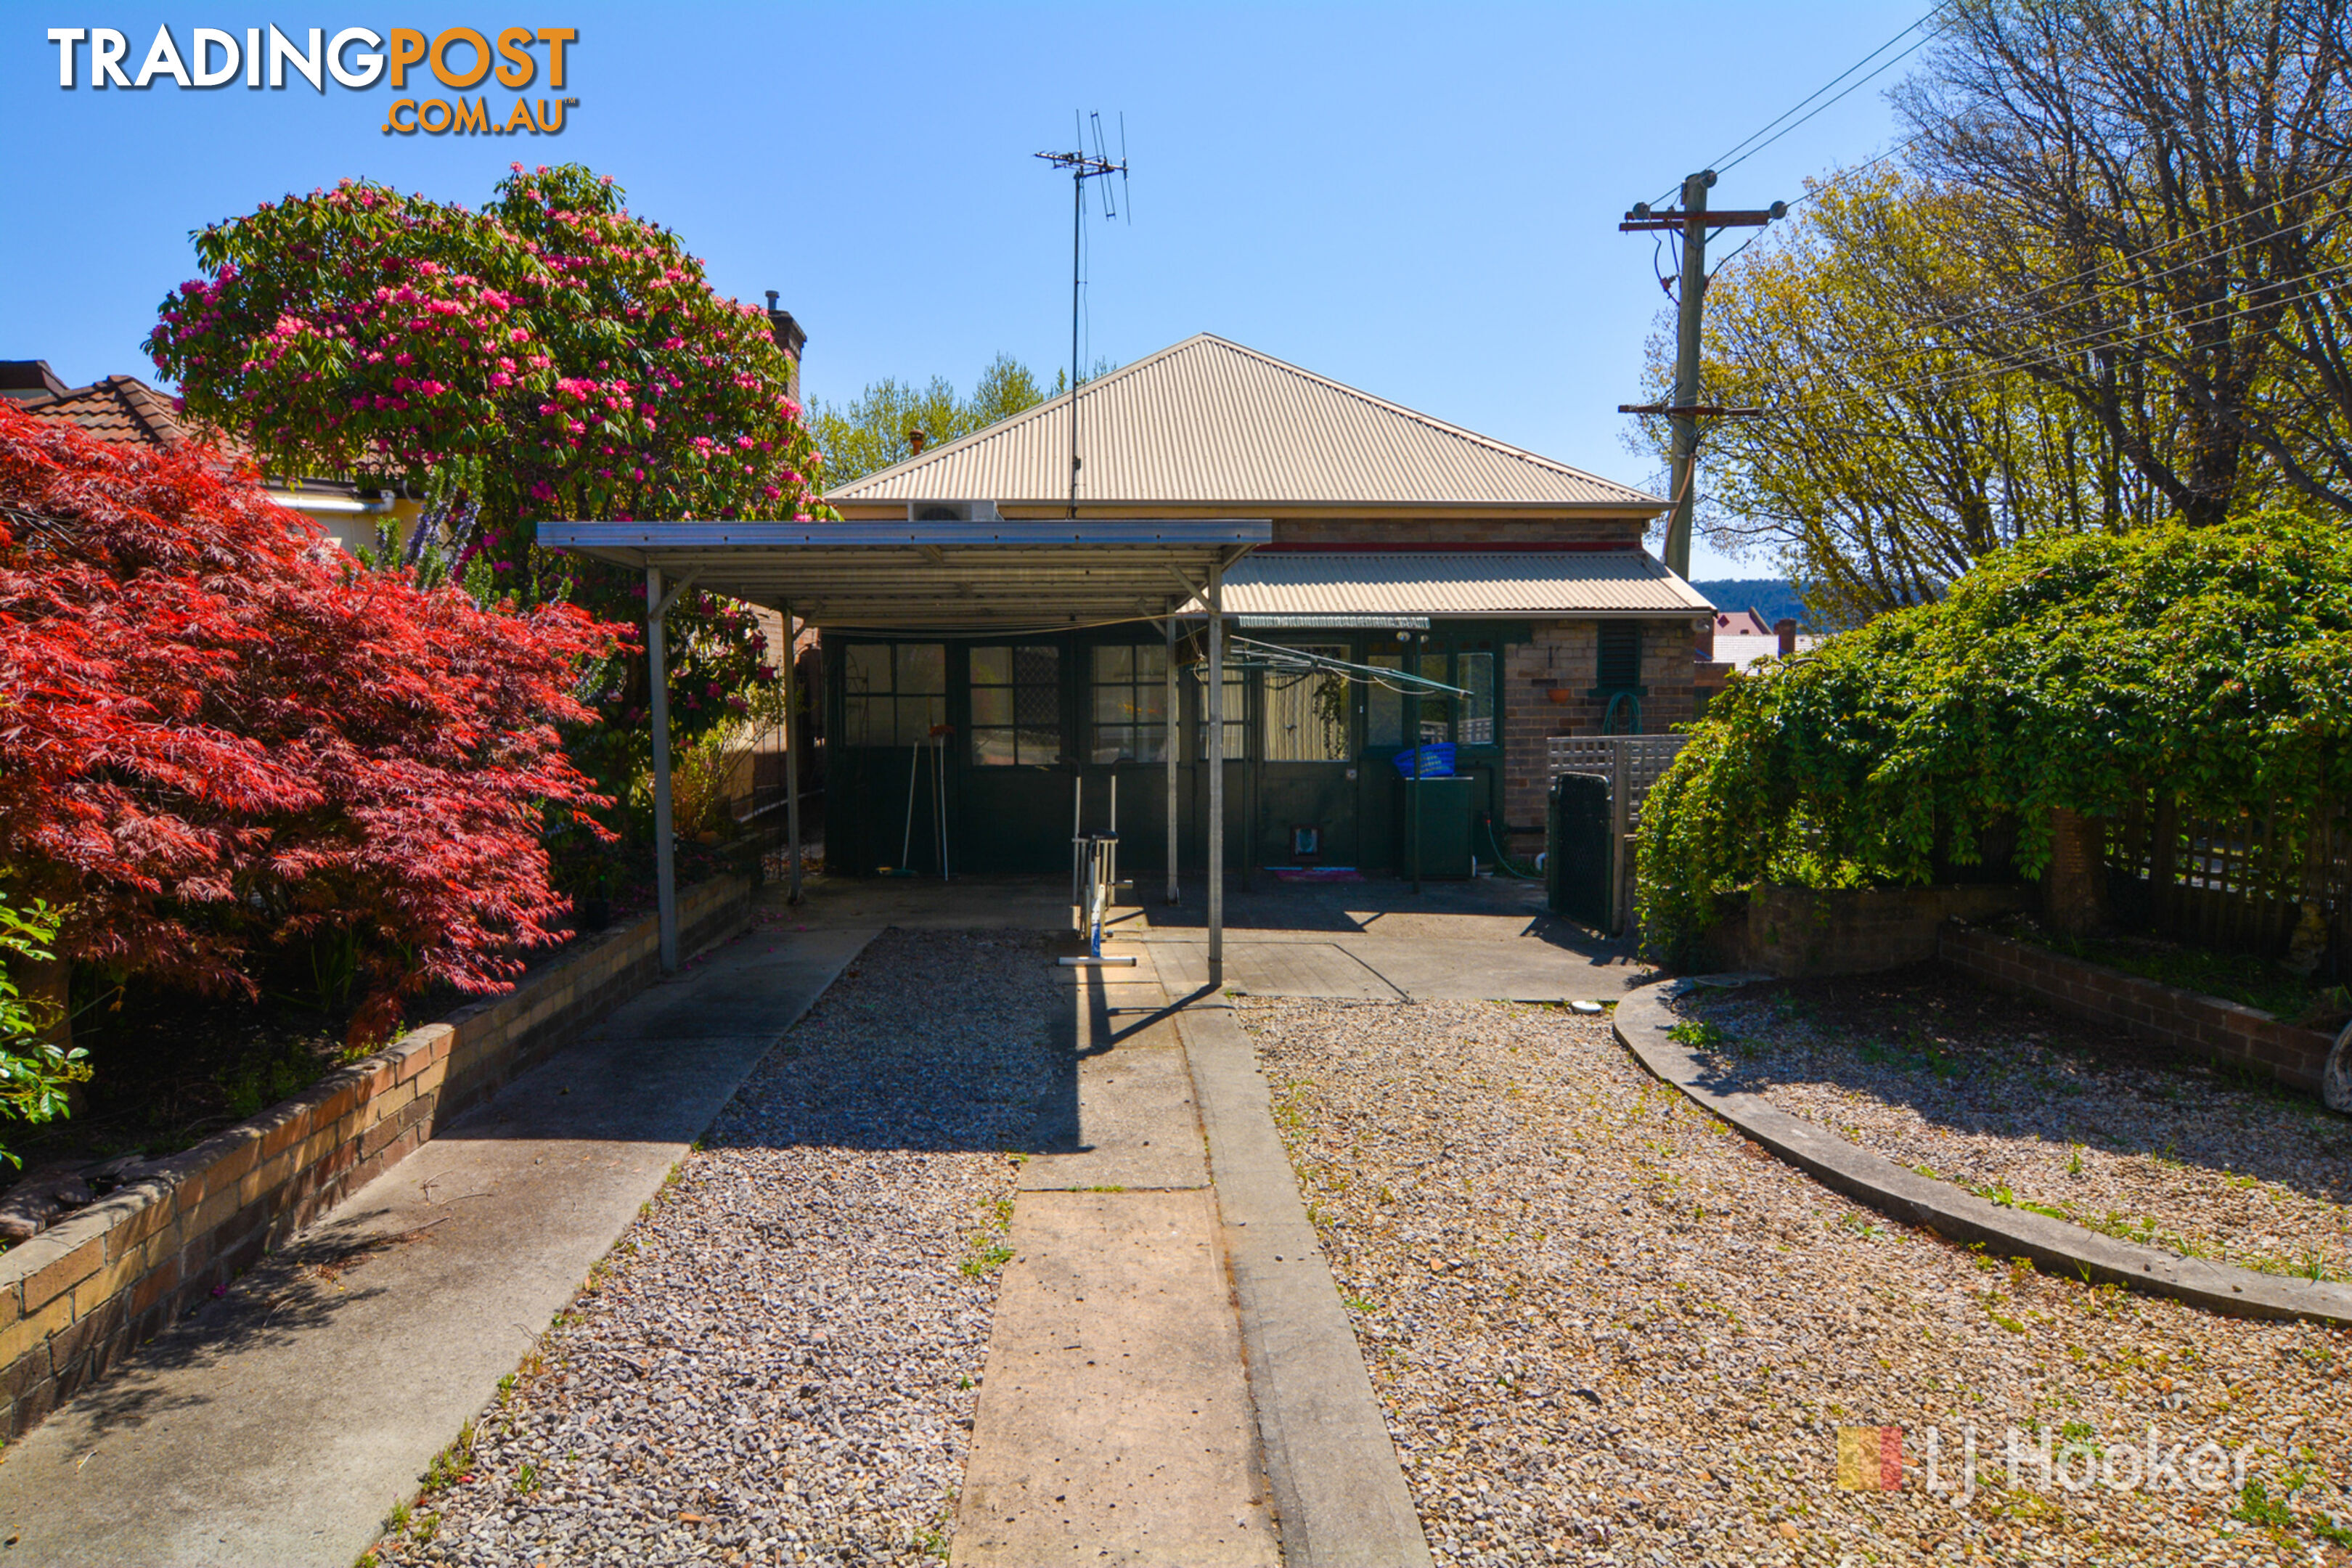 153 Mort Street LITHGOW NSW 2790